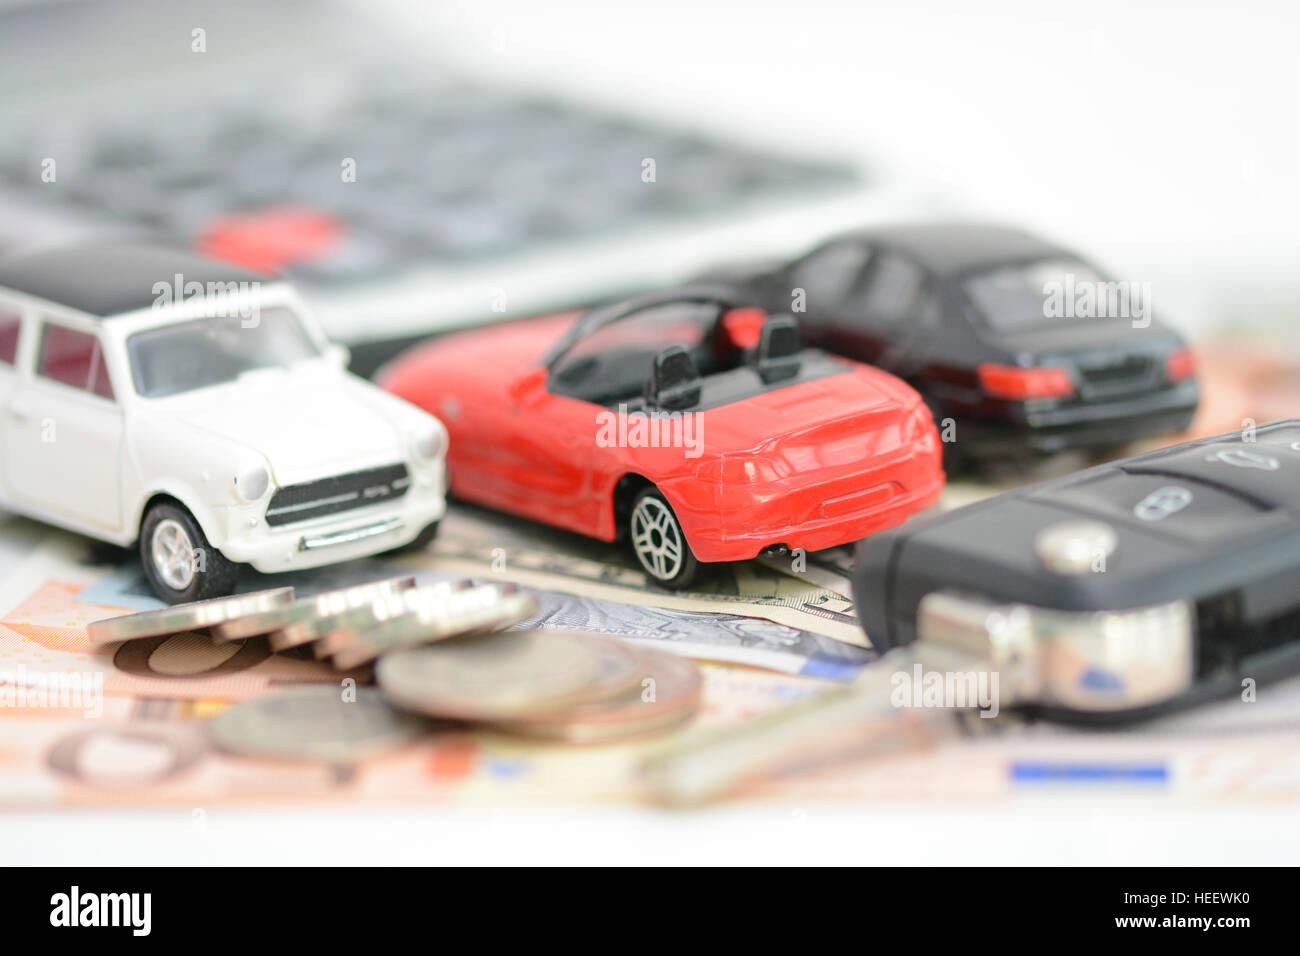 Buying or renting a car concept with car toys, car key, coins and bills Stock Photo